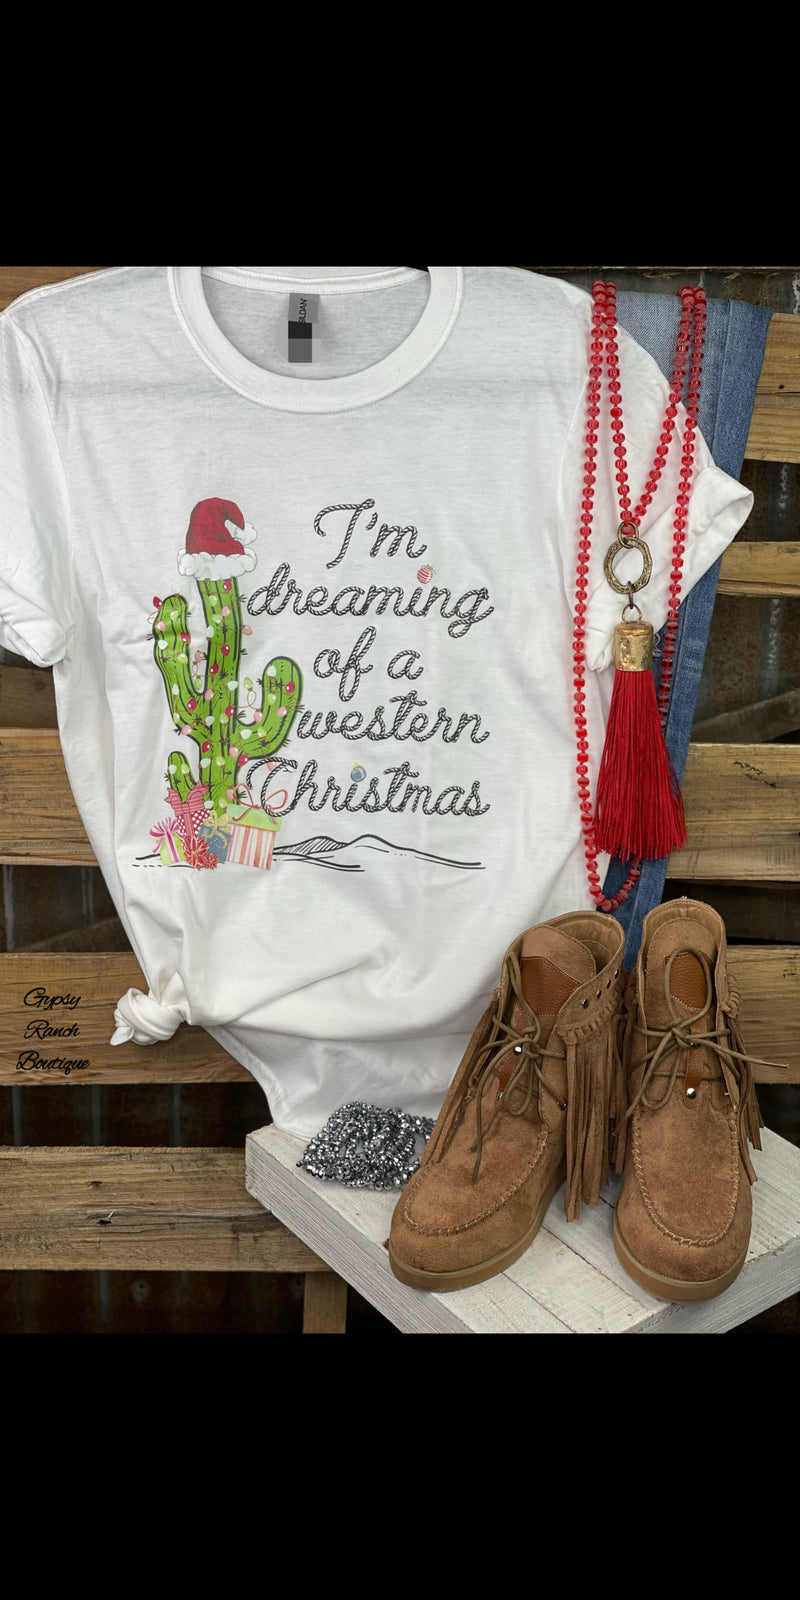 Dreaming of a Western Christmas Top - Also in Plus Size